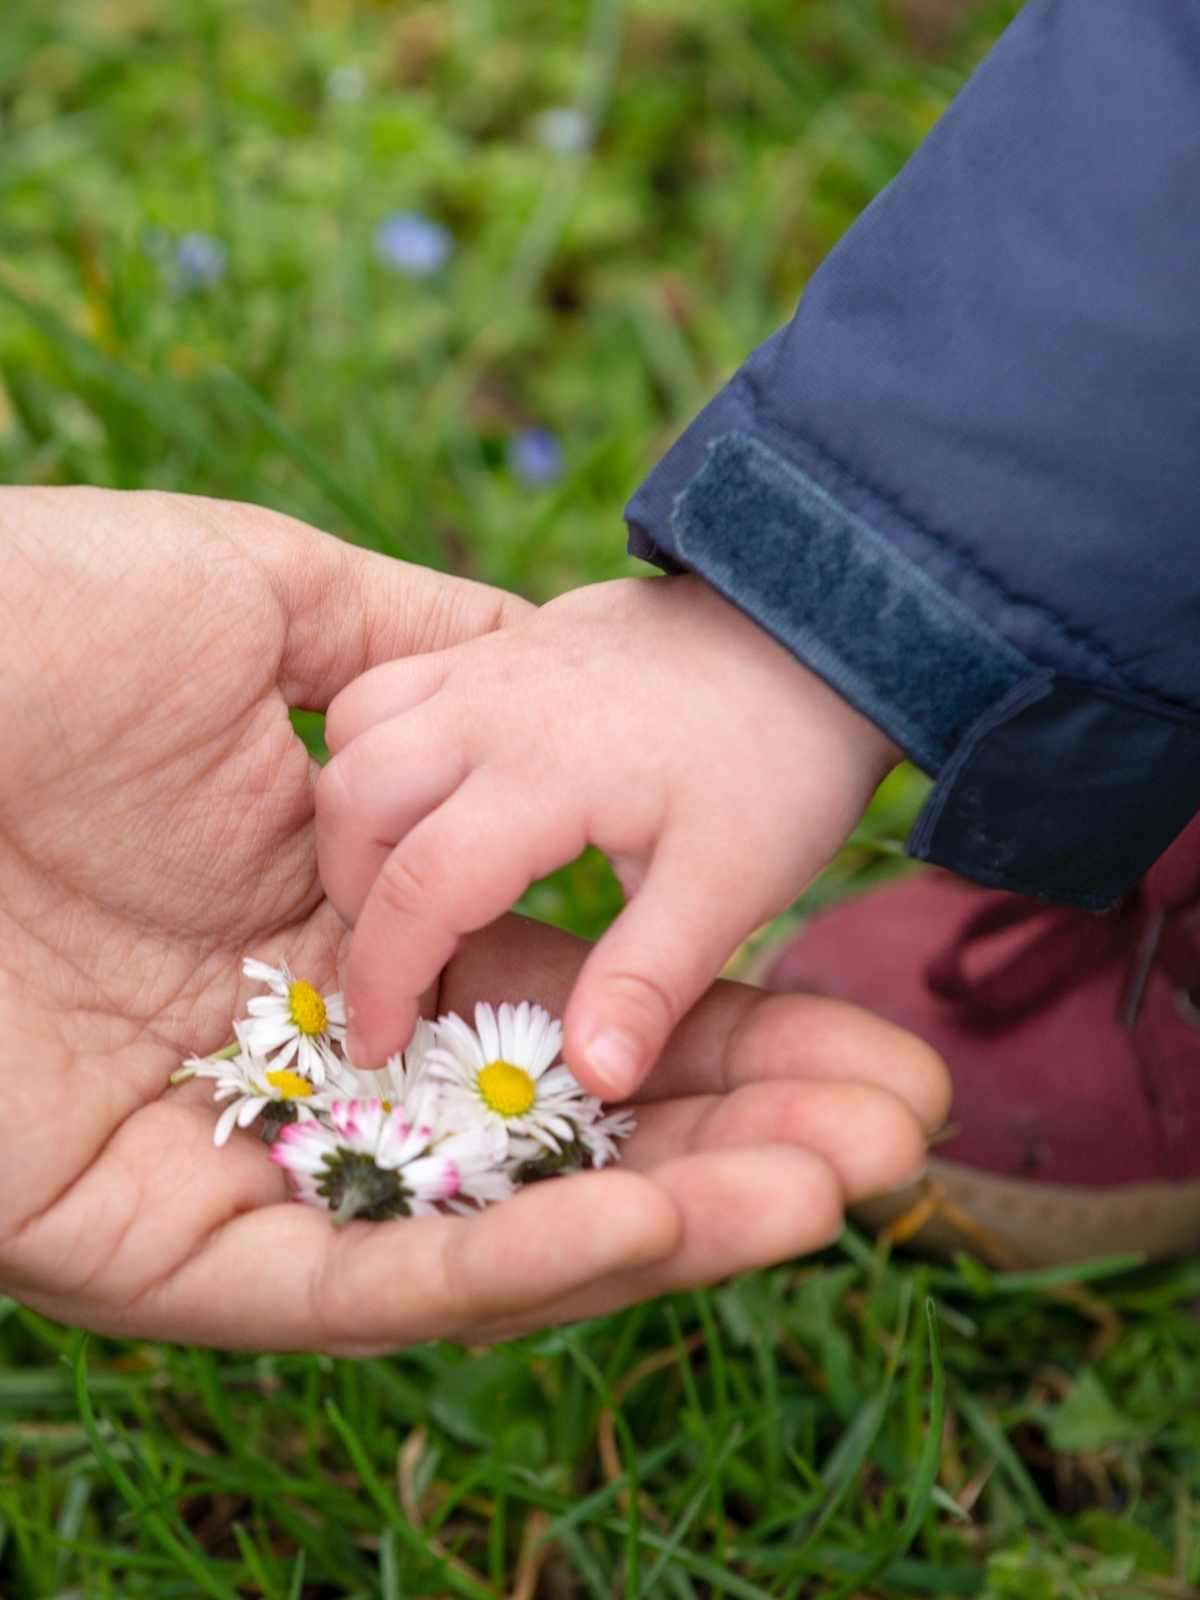 adult's hand holding small white and yellow flowers and a young child's hand above the flowers. Child wearing a navy jacket and red shoes outside in grass